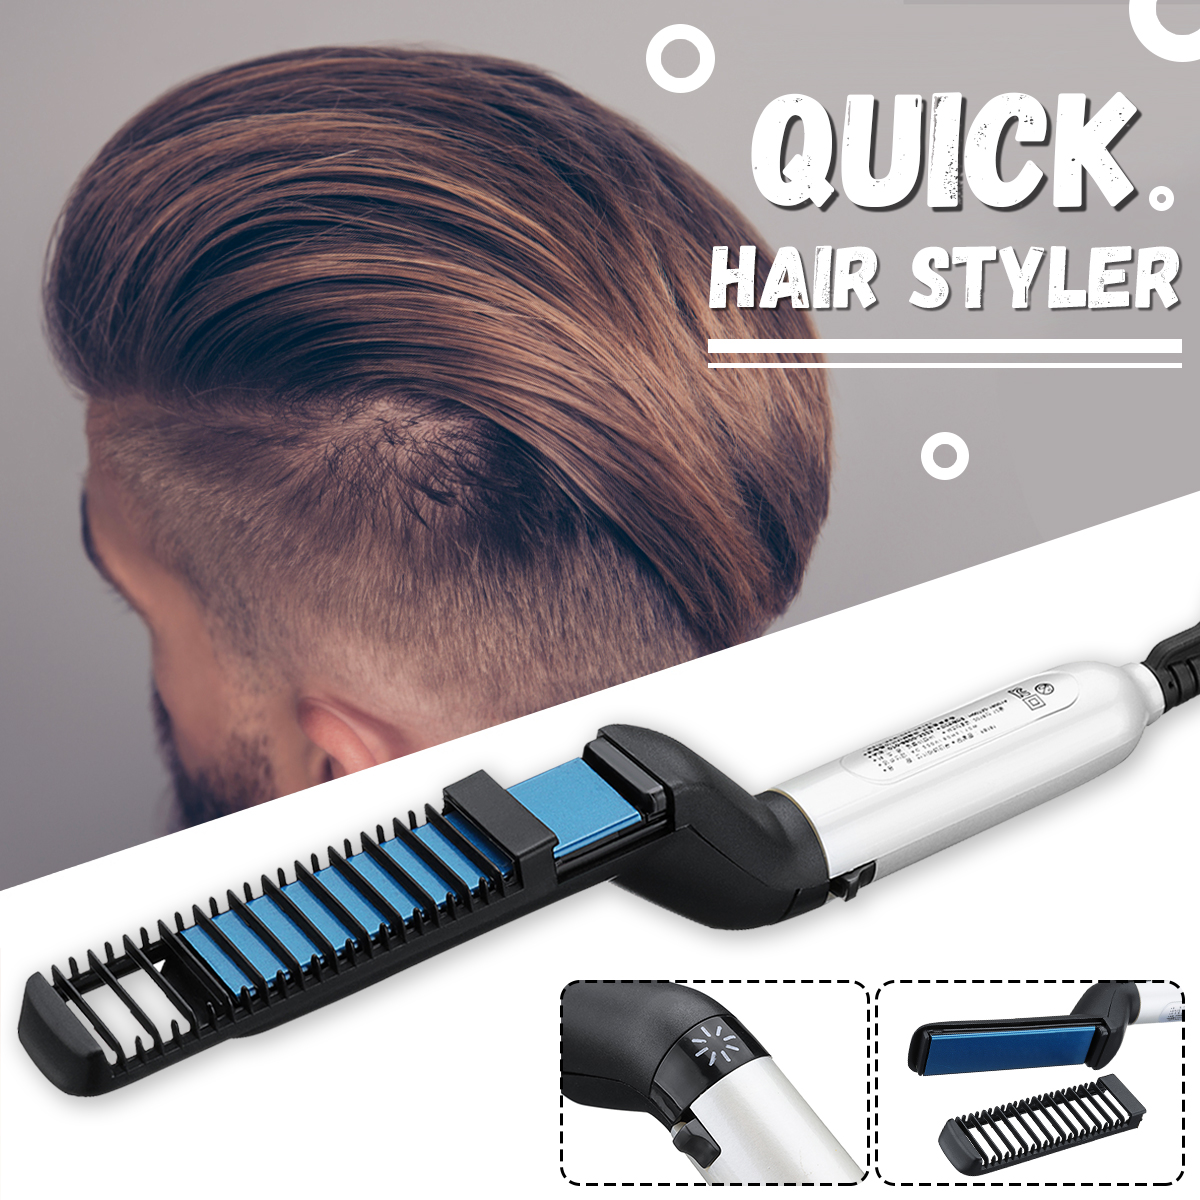 Head-Massager-Comb-Quick-Hair-Styler-for-Men-Aolvo-Pro-Curling-Iron-Side-Straighter-Hair-Comb-Hairdr-1372381